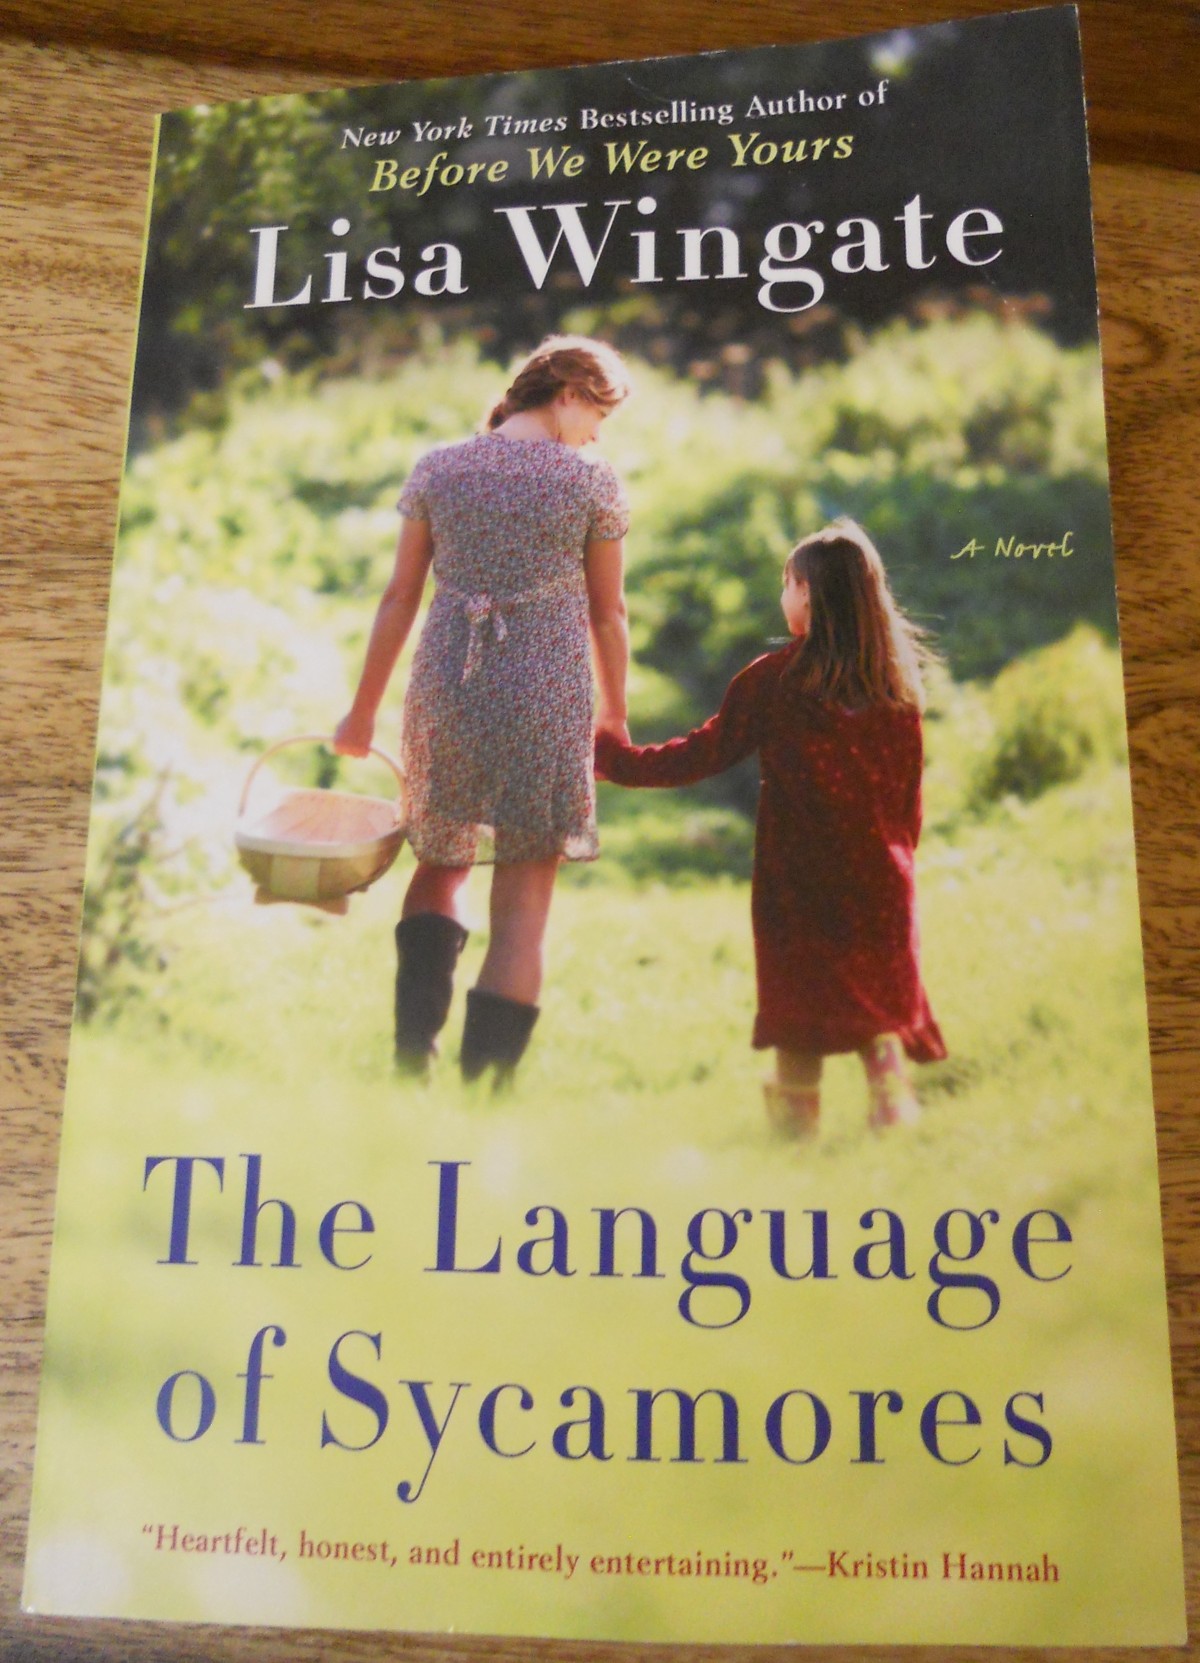 Book Review: The Language of Sycamores